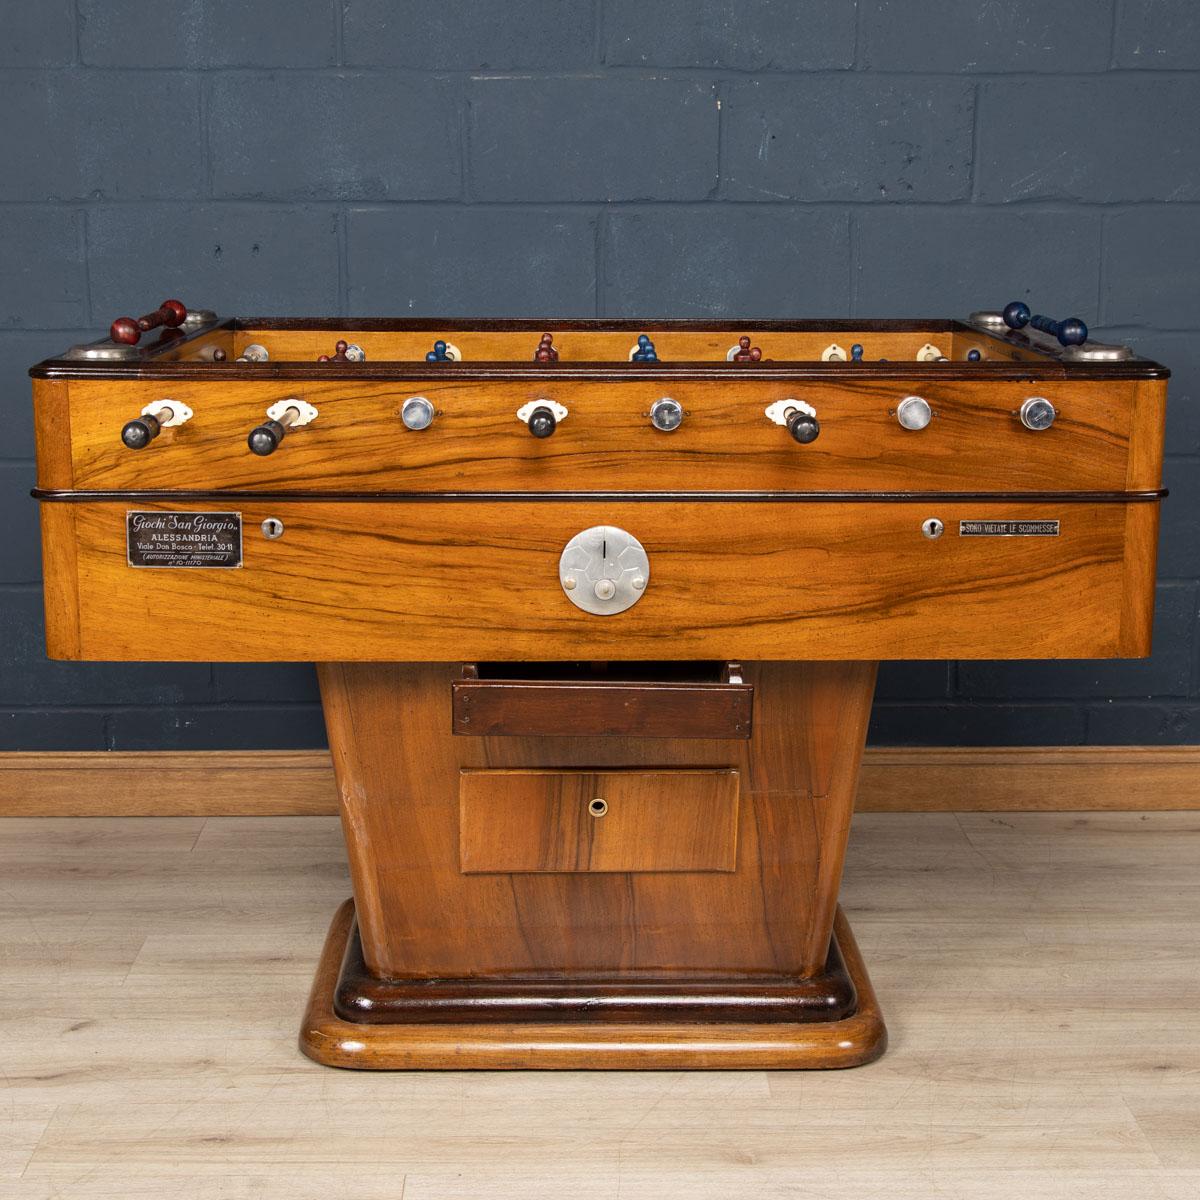 A truly striking table football table made in Italy around the middle of the 20th century.

CONDITION
In Great Vintage Condition - sympathetically restored. Nuts holding the players replaced, some crazing to the green glass playing surface where